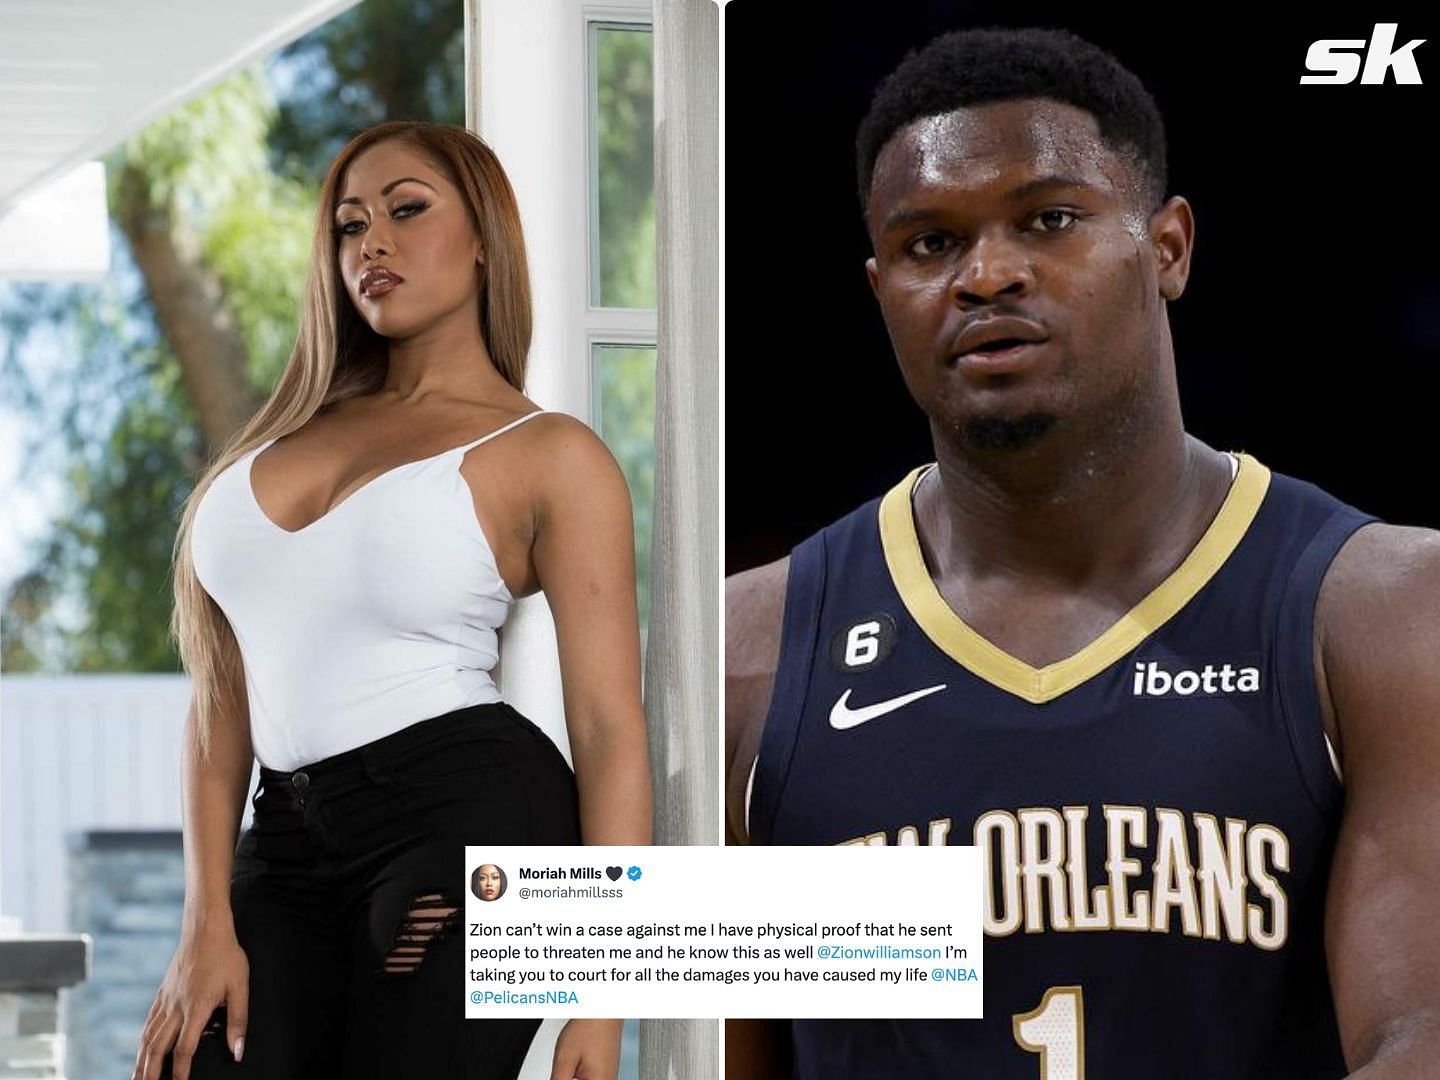 Moriah Mills claims she will take Zion Williamson to court